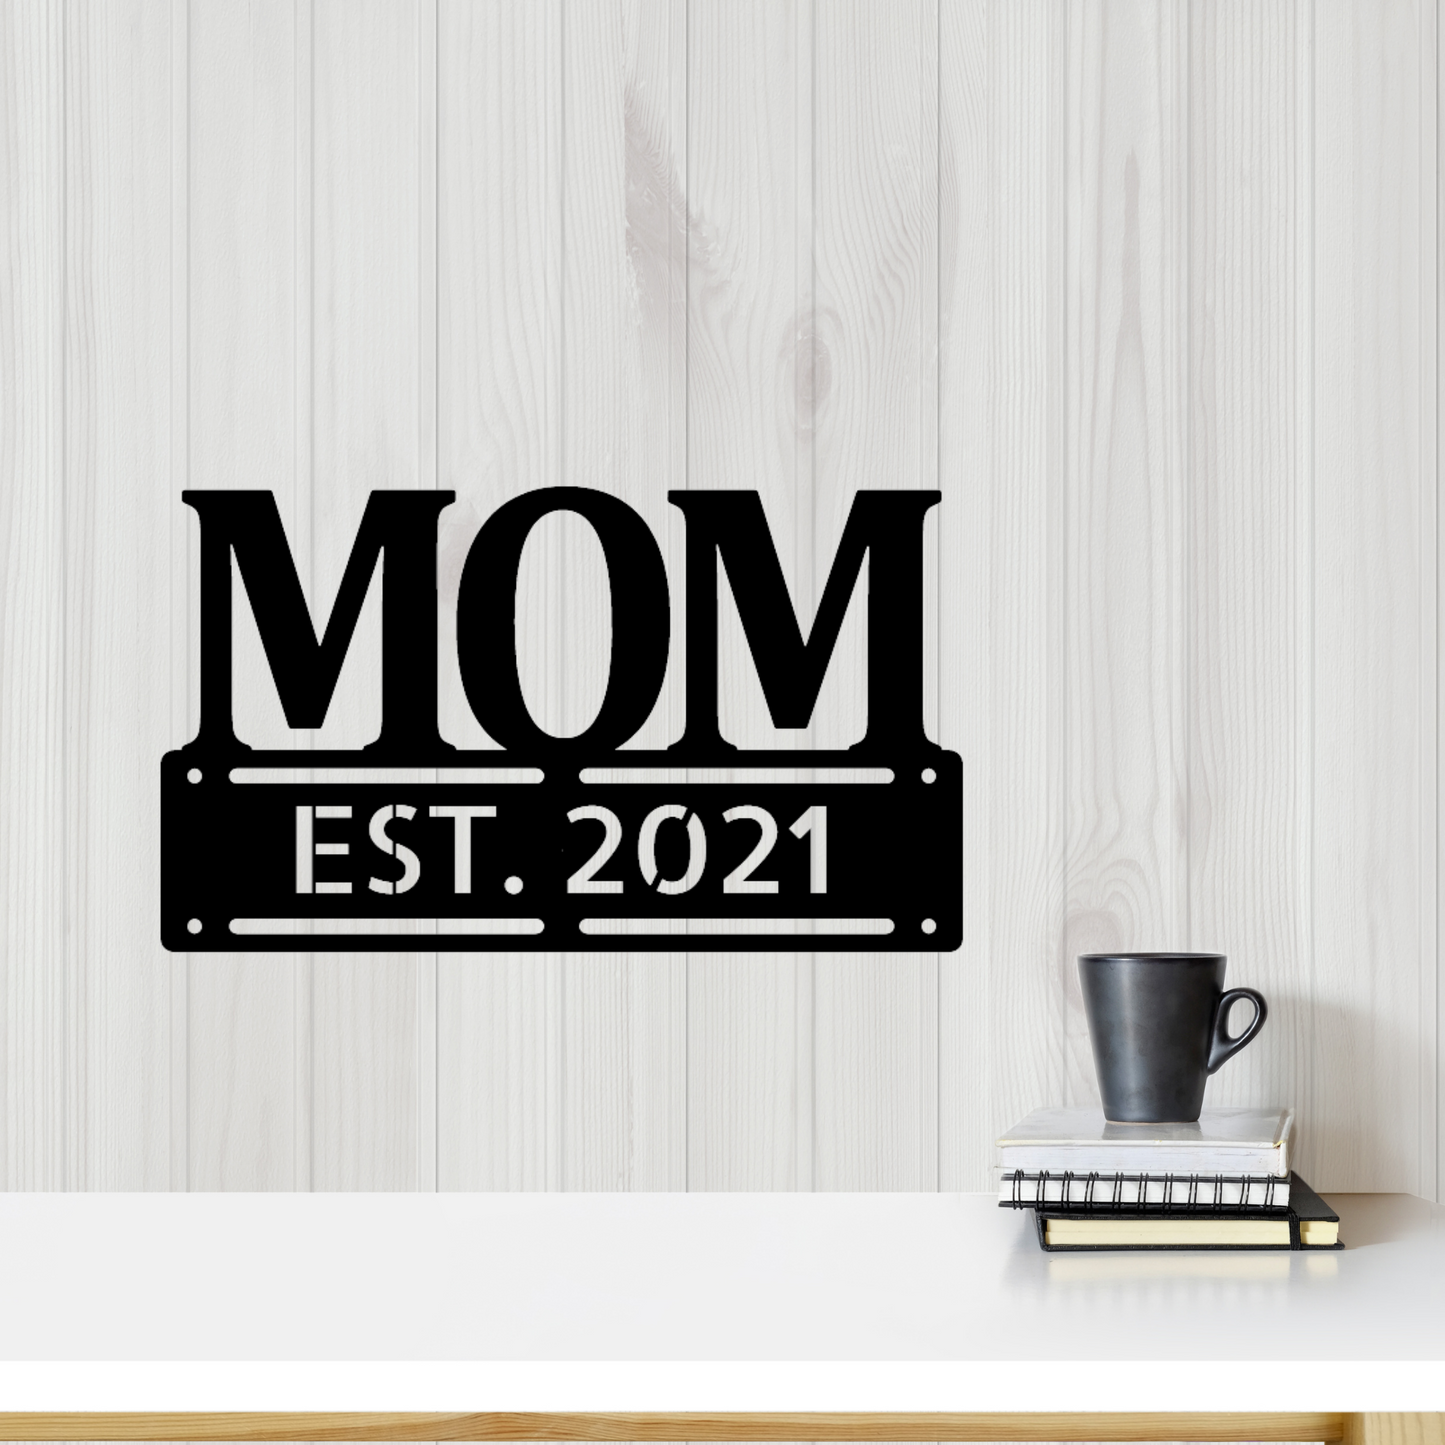 Personalized Metal Sign for Mom, Sign for Mom, Gift for New Mom, Custom Made Sign, Metal Wall Art, Gift for Mother, Personalized Gift for Momma, Solid